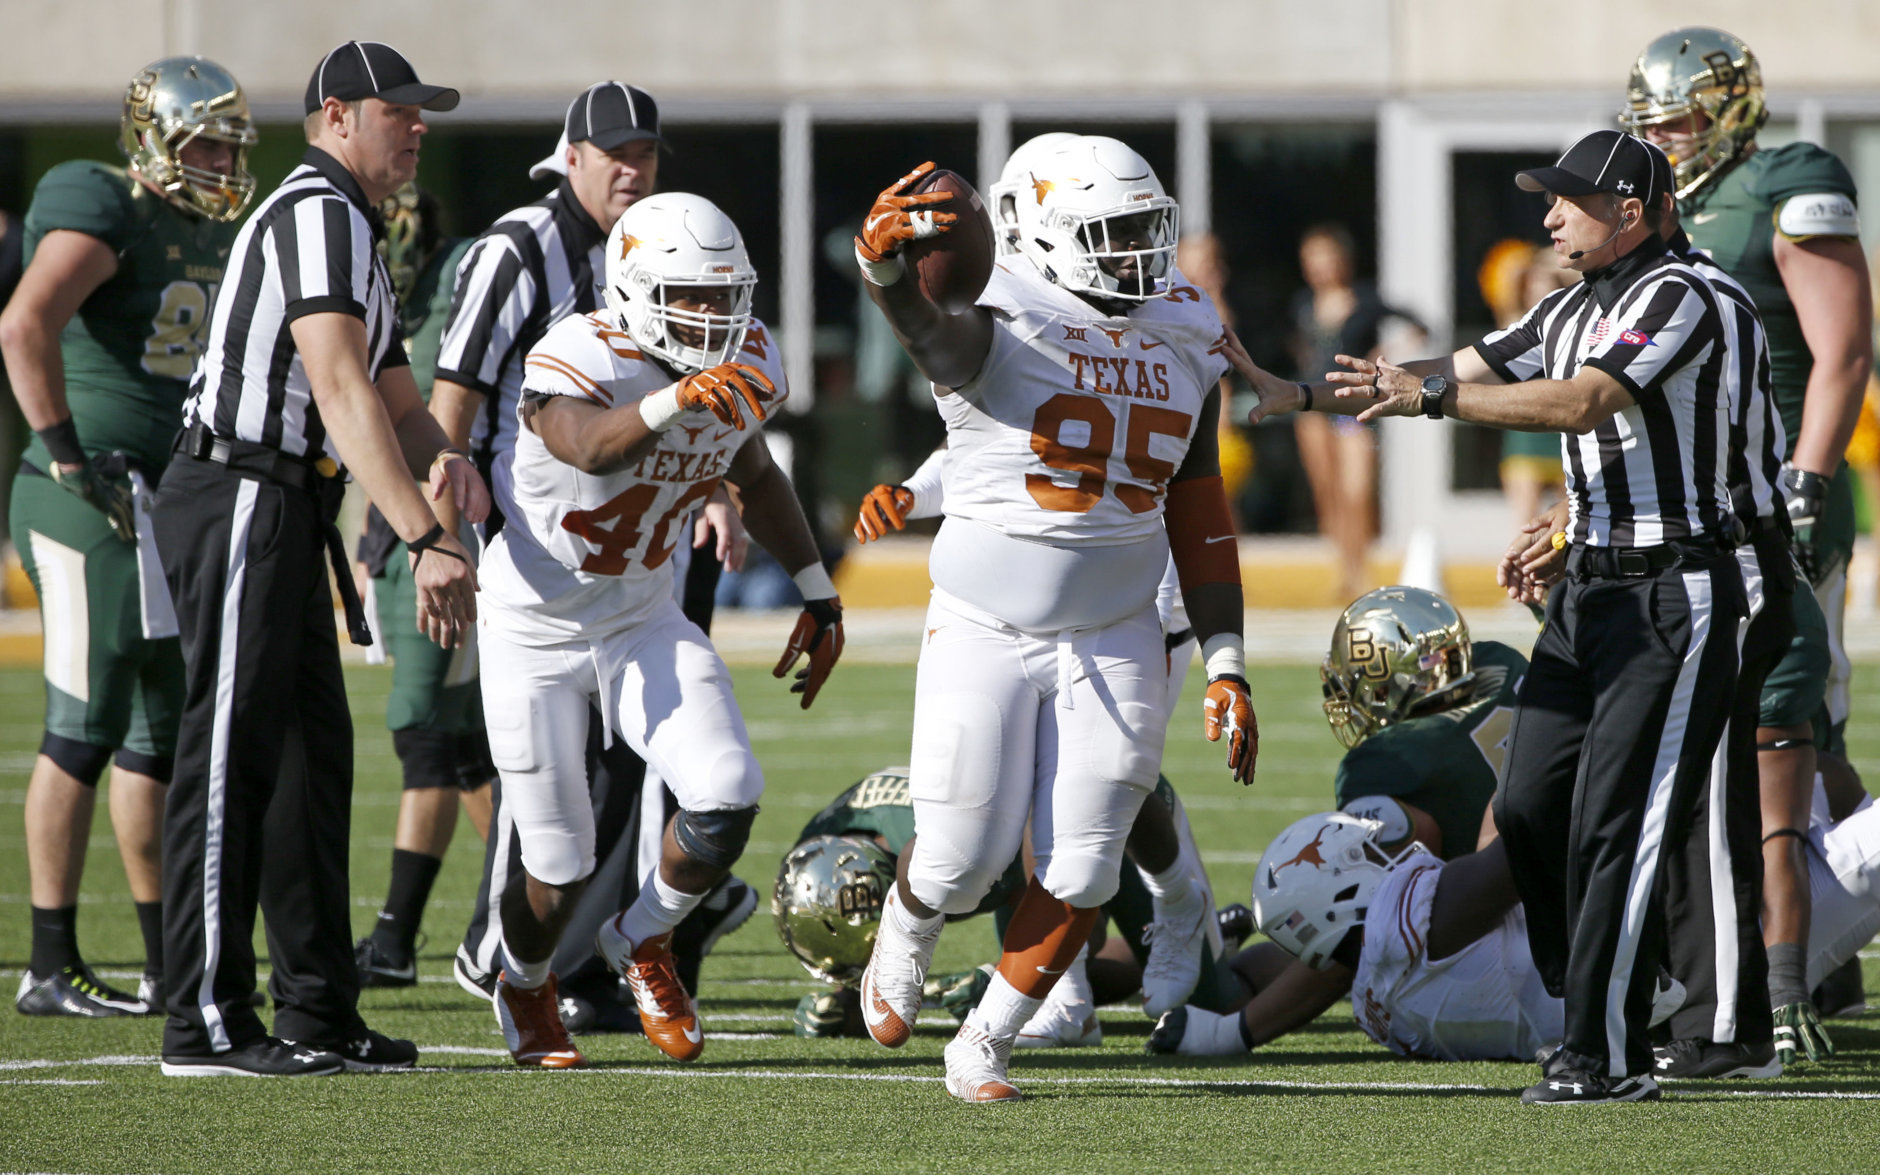 WACO, TX - DECEMBER 5: Poona Ford #95 of theTexas Longhorns celebrates with teammate Naashon Hughes #40 after recovering a fumble against Johnny Jefferson #5 of the Baylor Bears in the fourth quarter at McLane Stadium on December 5, 2015 in Waco, Texas. (Photo by Ron Jenkins/Getty Images)